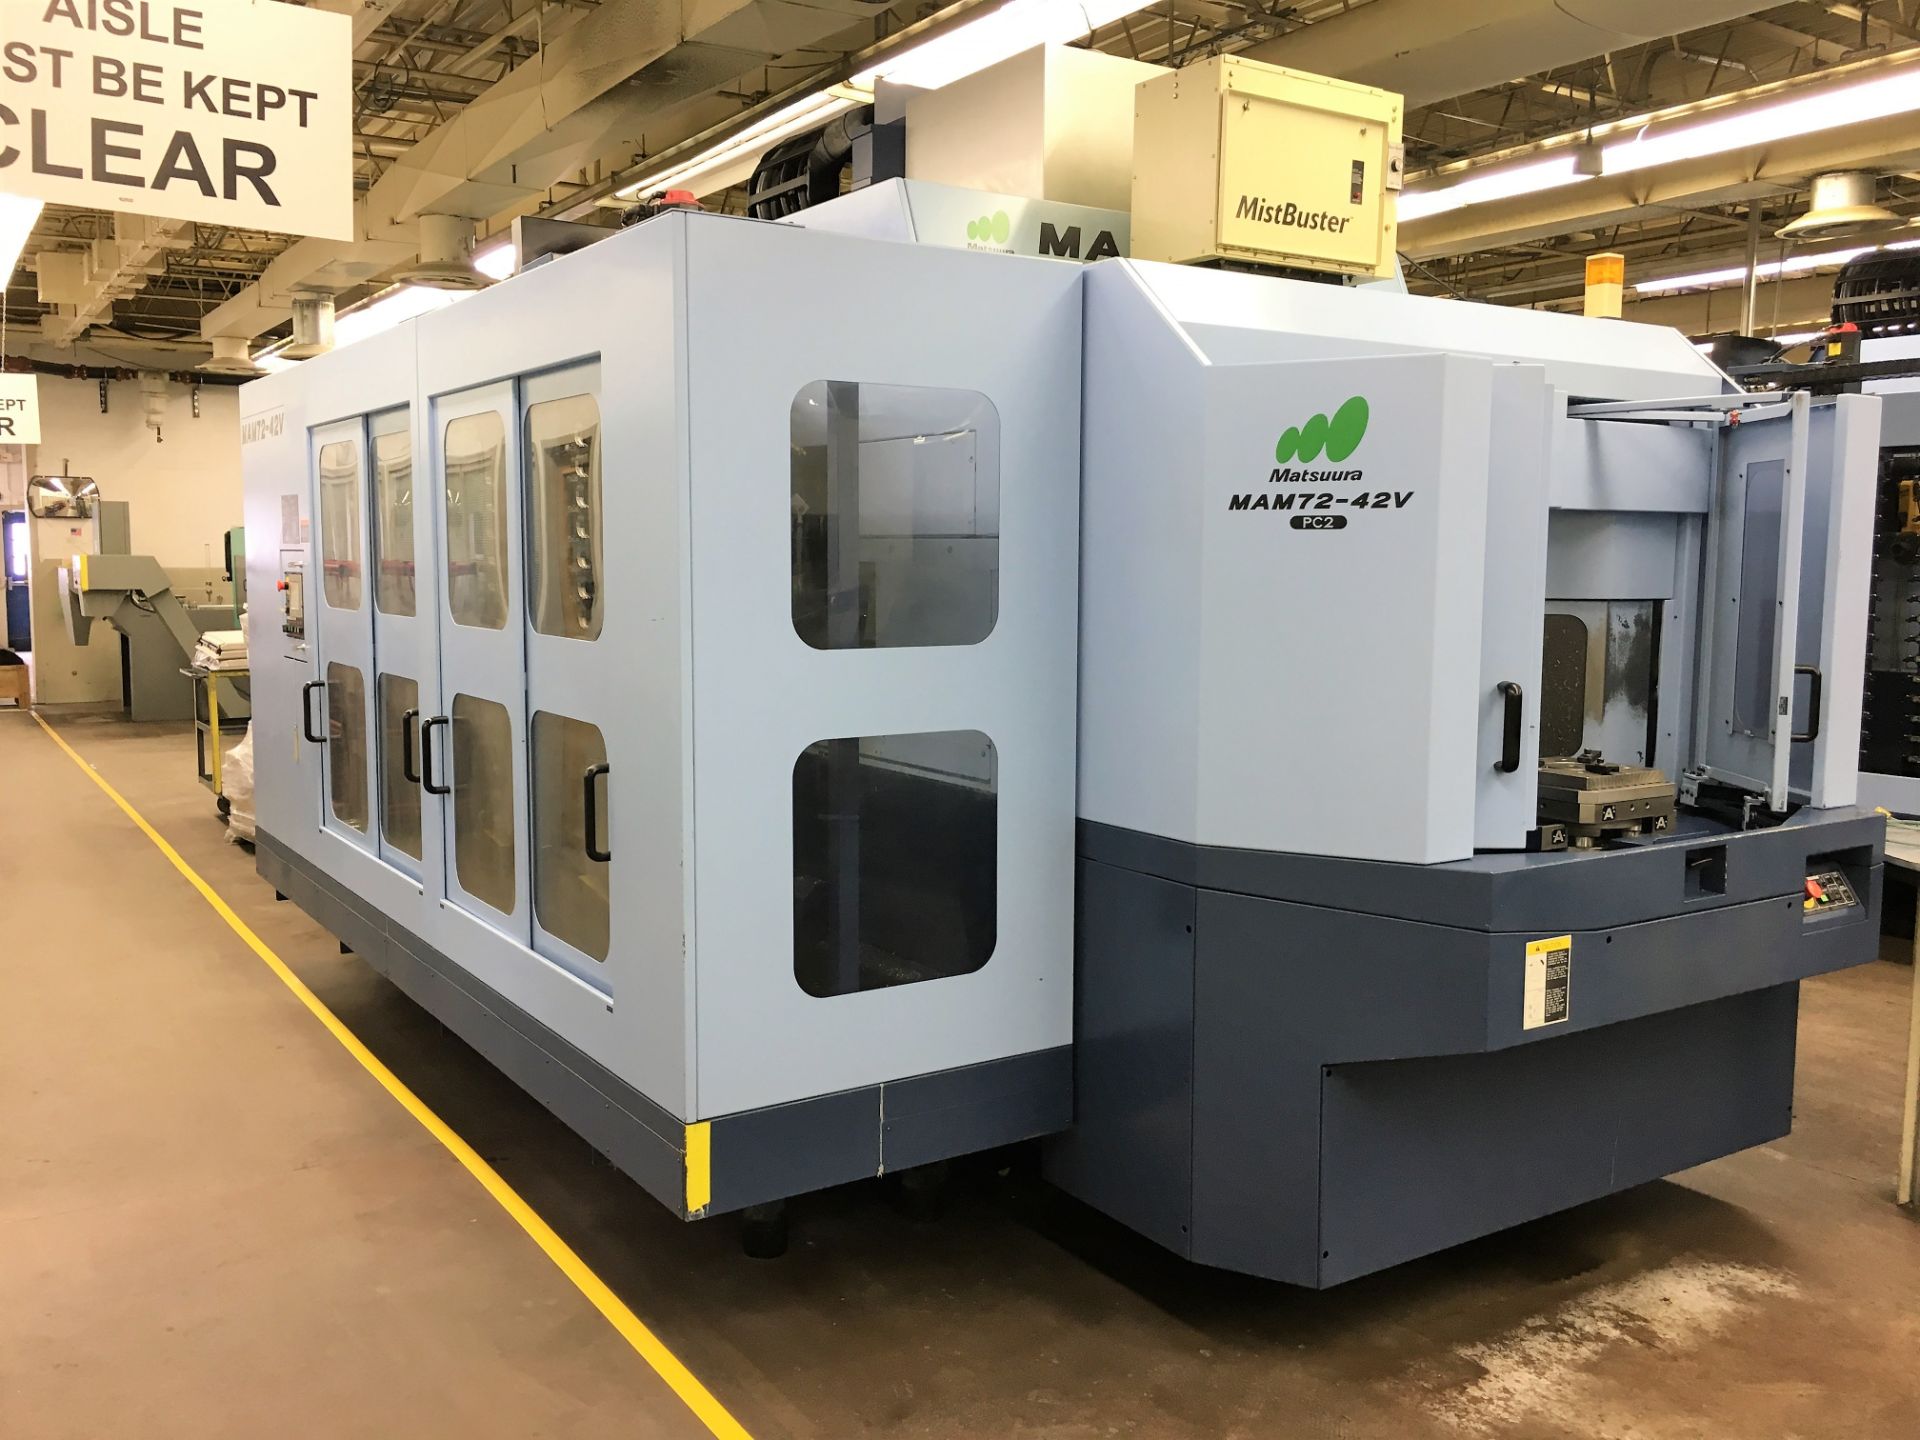 MATSUURA # MAM-72-42V ''TRUNNION-TYPE'' ''FULL-5-AXIS'' CNC VERTICAL MACHINING CENTER WITH - Image 5 of 7